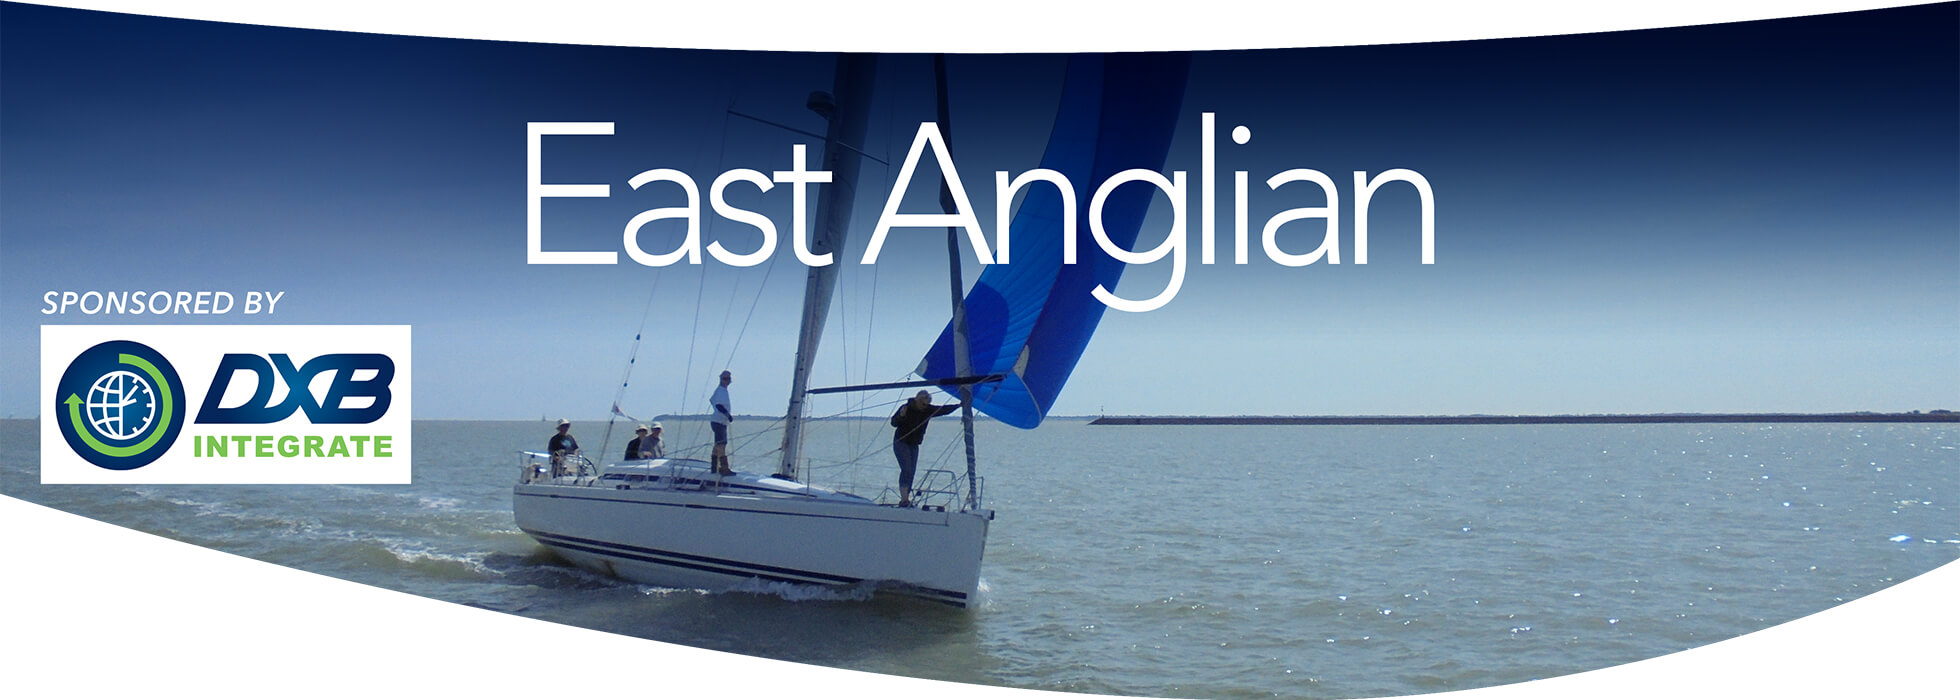 East Anglian Offshore Racing Association